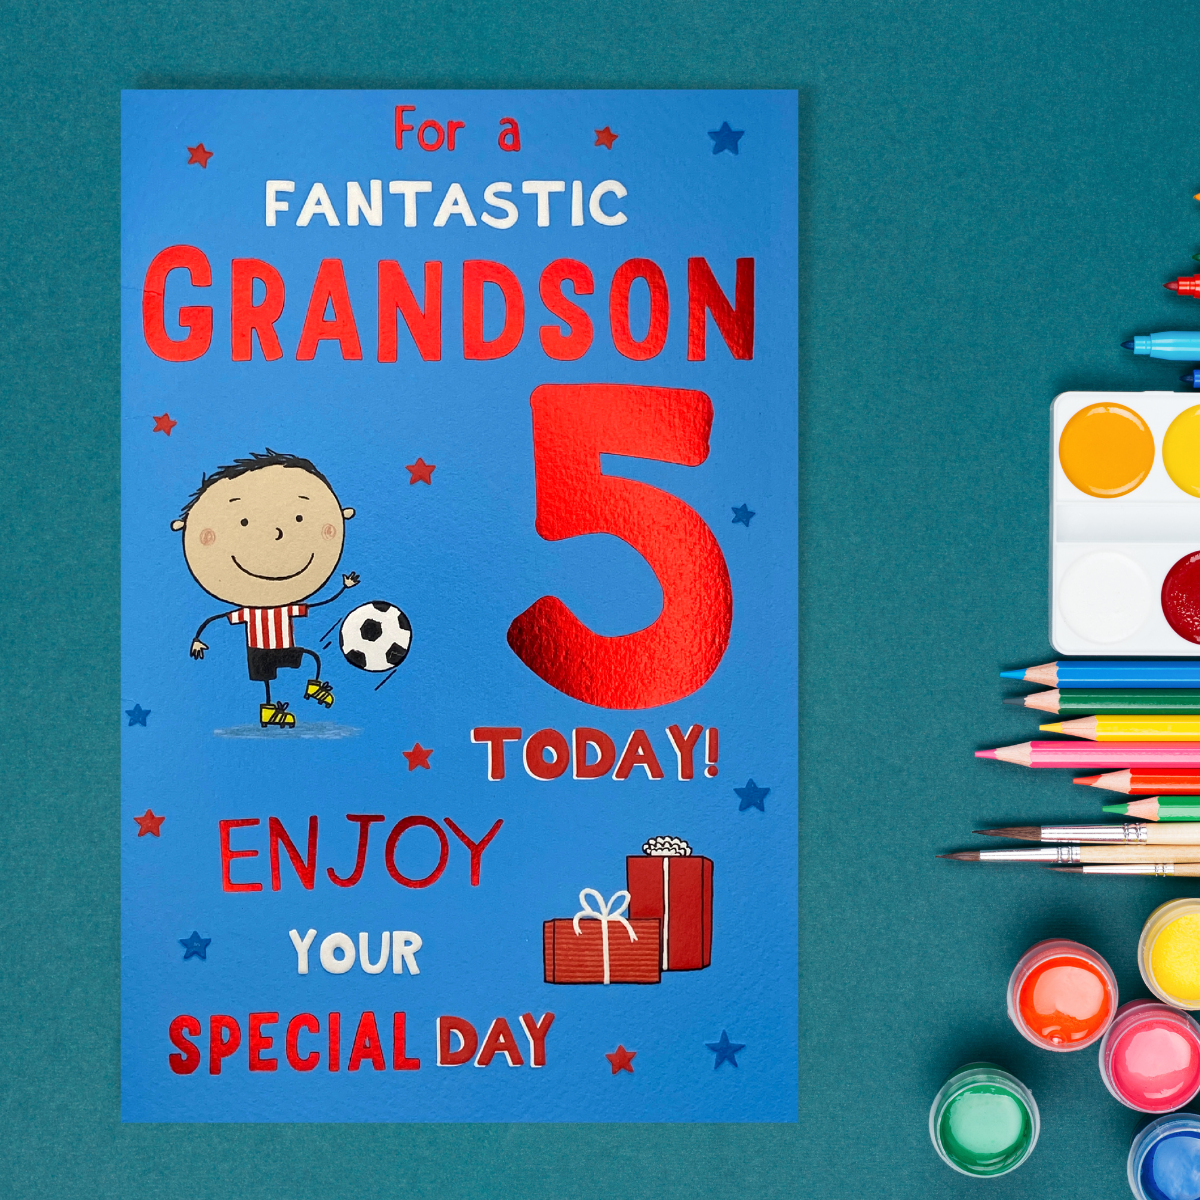 Front card image showing cartoon footballer and gifts with red foil text